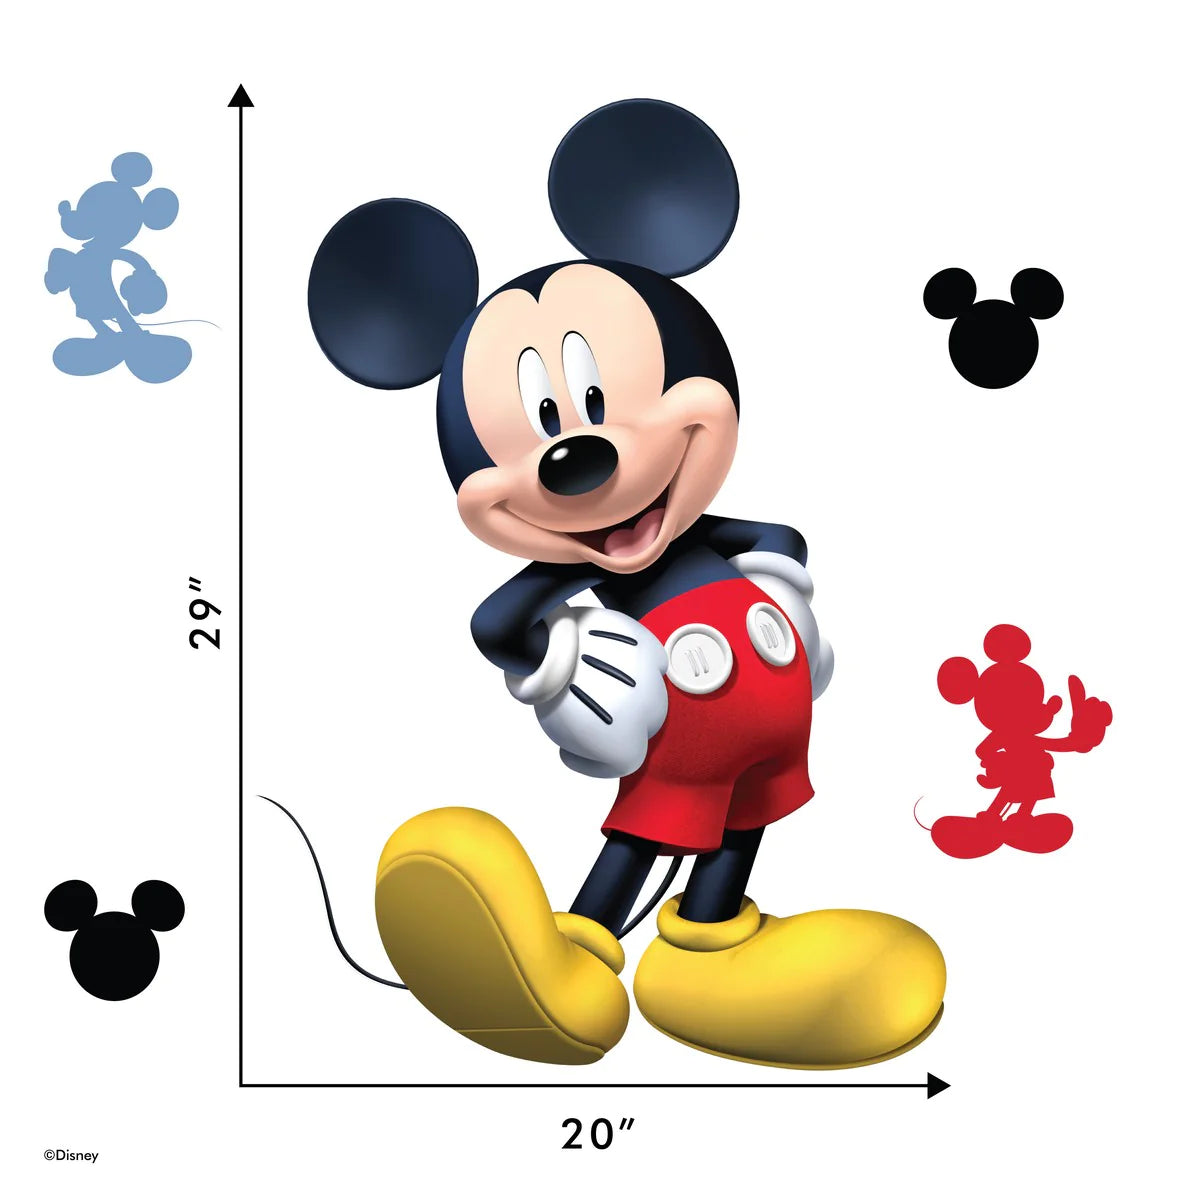 Mickey Mouse Interactive Removable Wall Decal – My Magical Disney Shopper